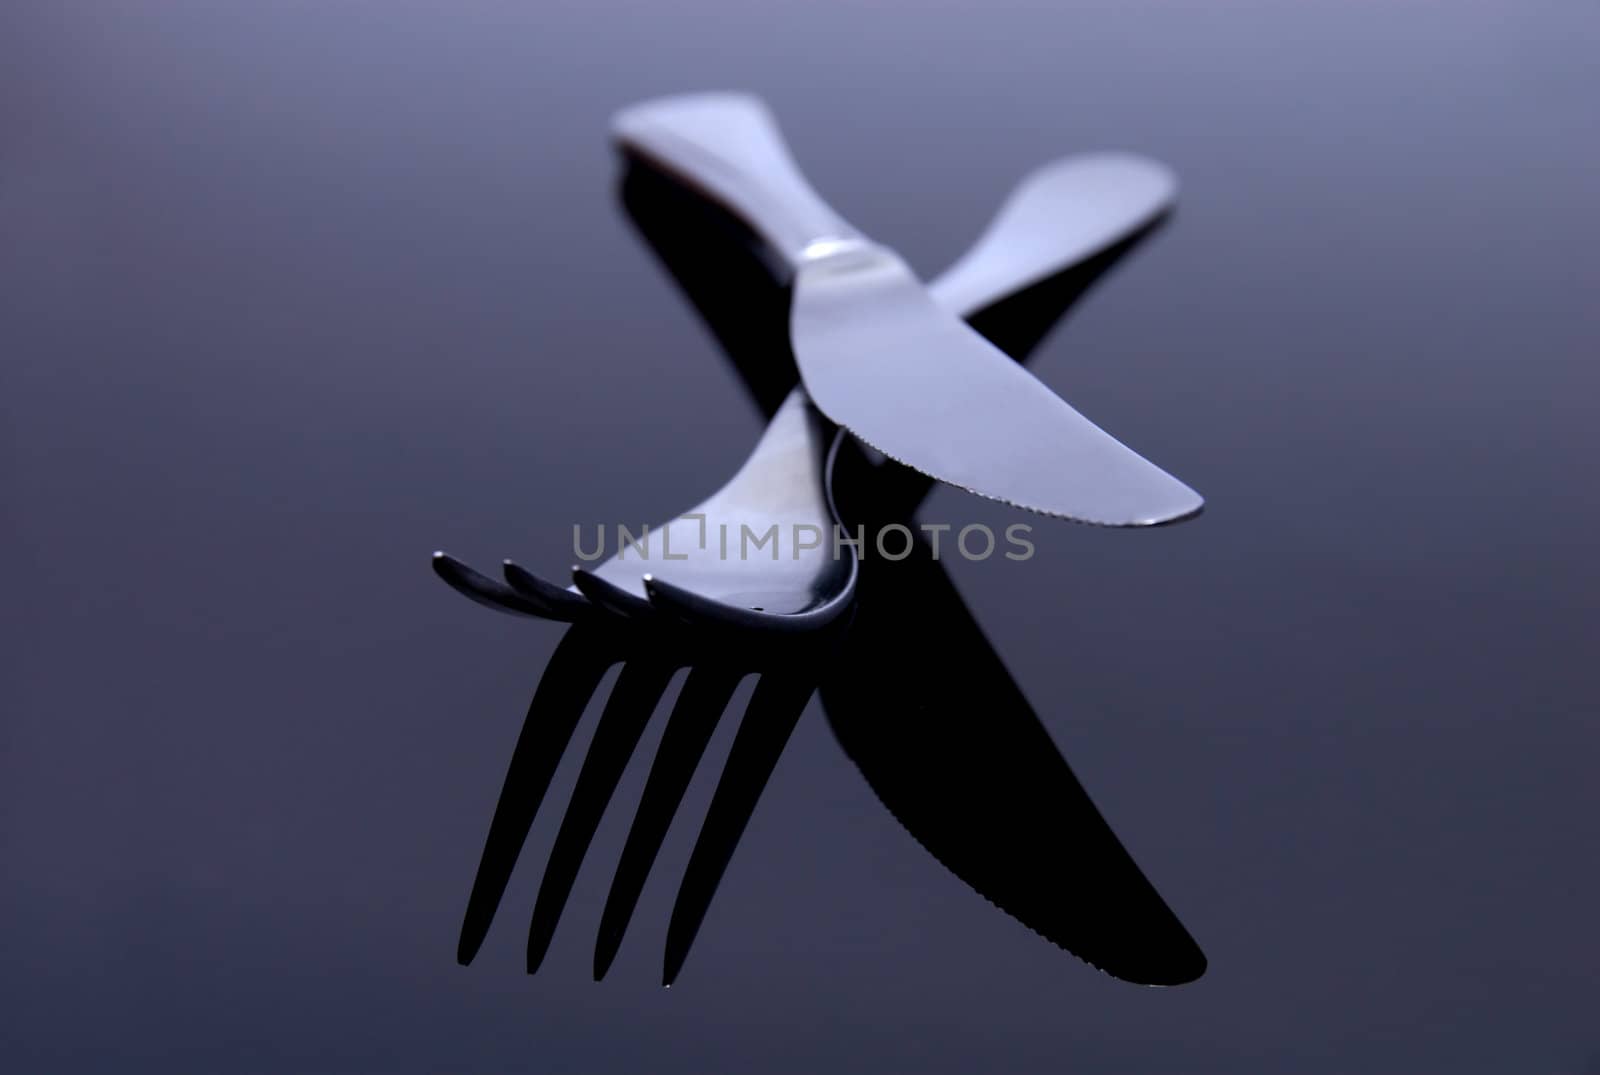 modern silver spoon, knife, fork on the mirror background by anki21